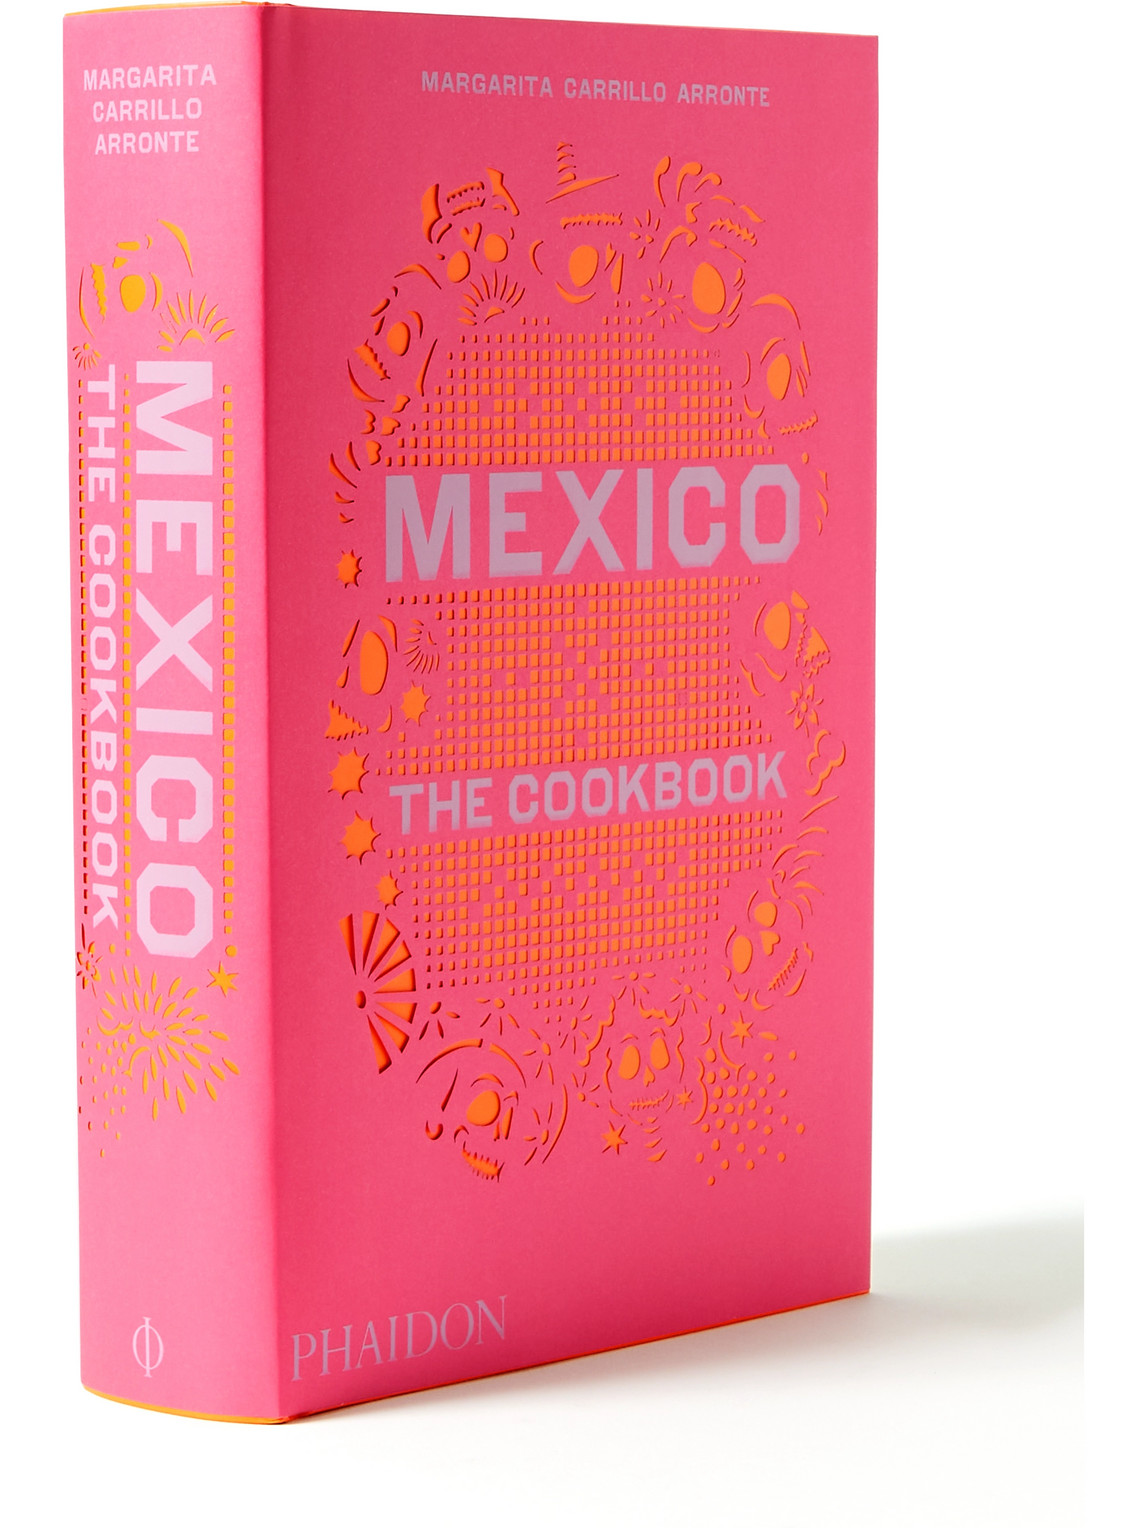 Phaidon Mexico: The Cookbook Hardcover Book In Pink